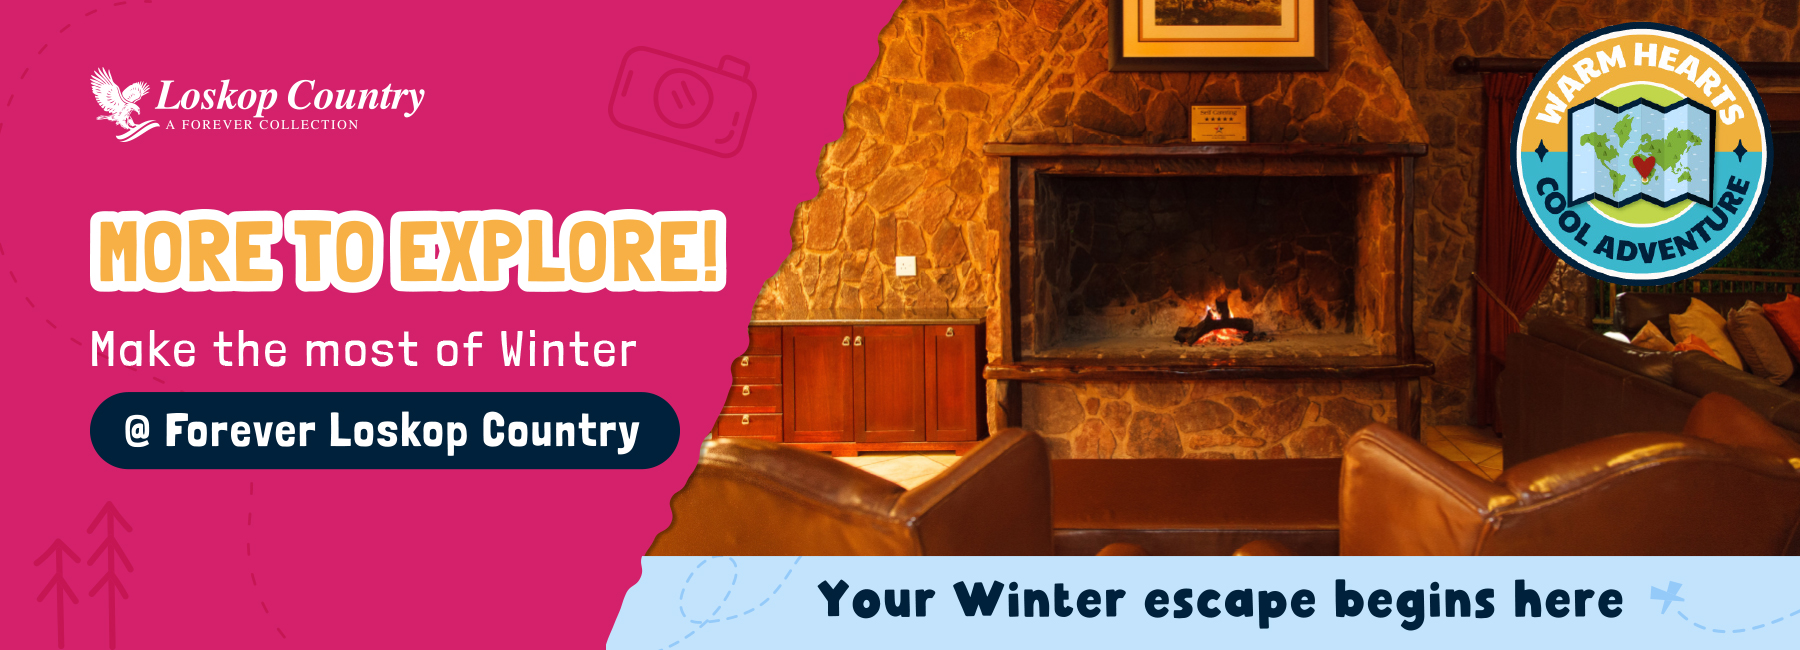 More to explore! Make the most of Winter at Loskop Country